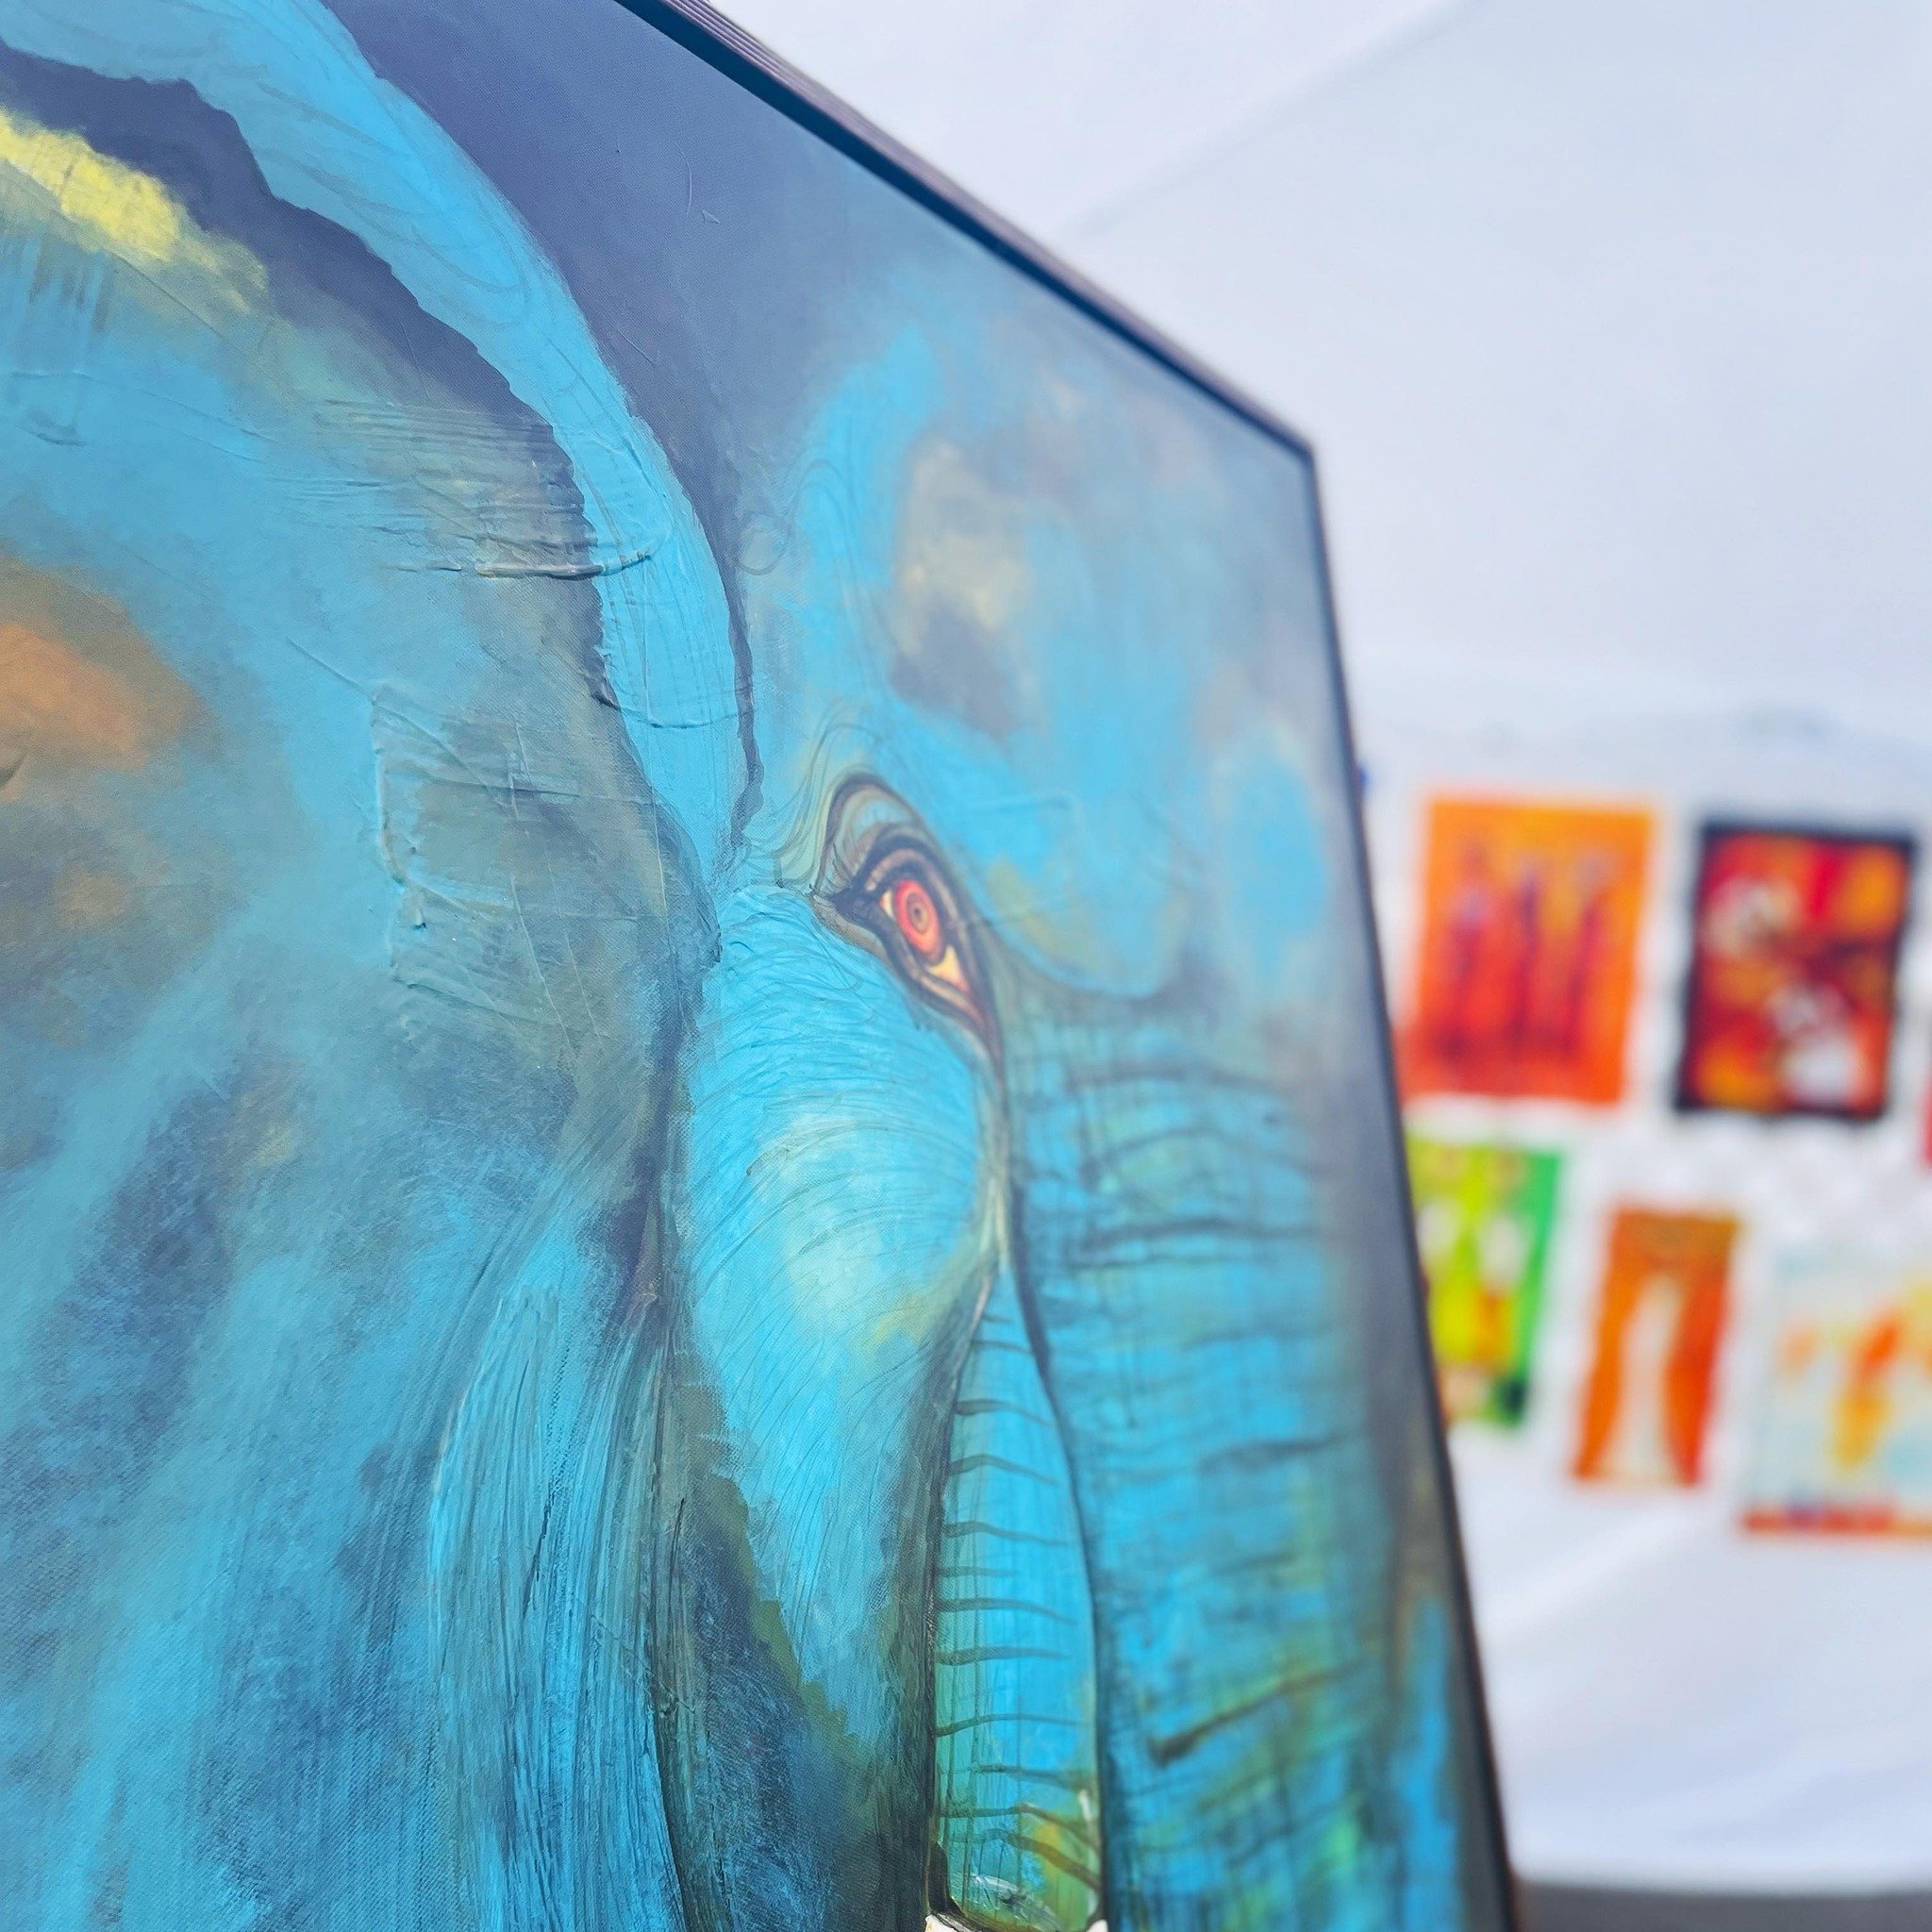 Isn&rsquo;t it just fabulous when you gaze at the art on your walls and can shout out the artist&rsquo;s name with confidence. Art shines bright at the @beaconfarmersmarket! Swing by every Sunday for a joyful journey through handcrafted treasures and